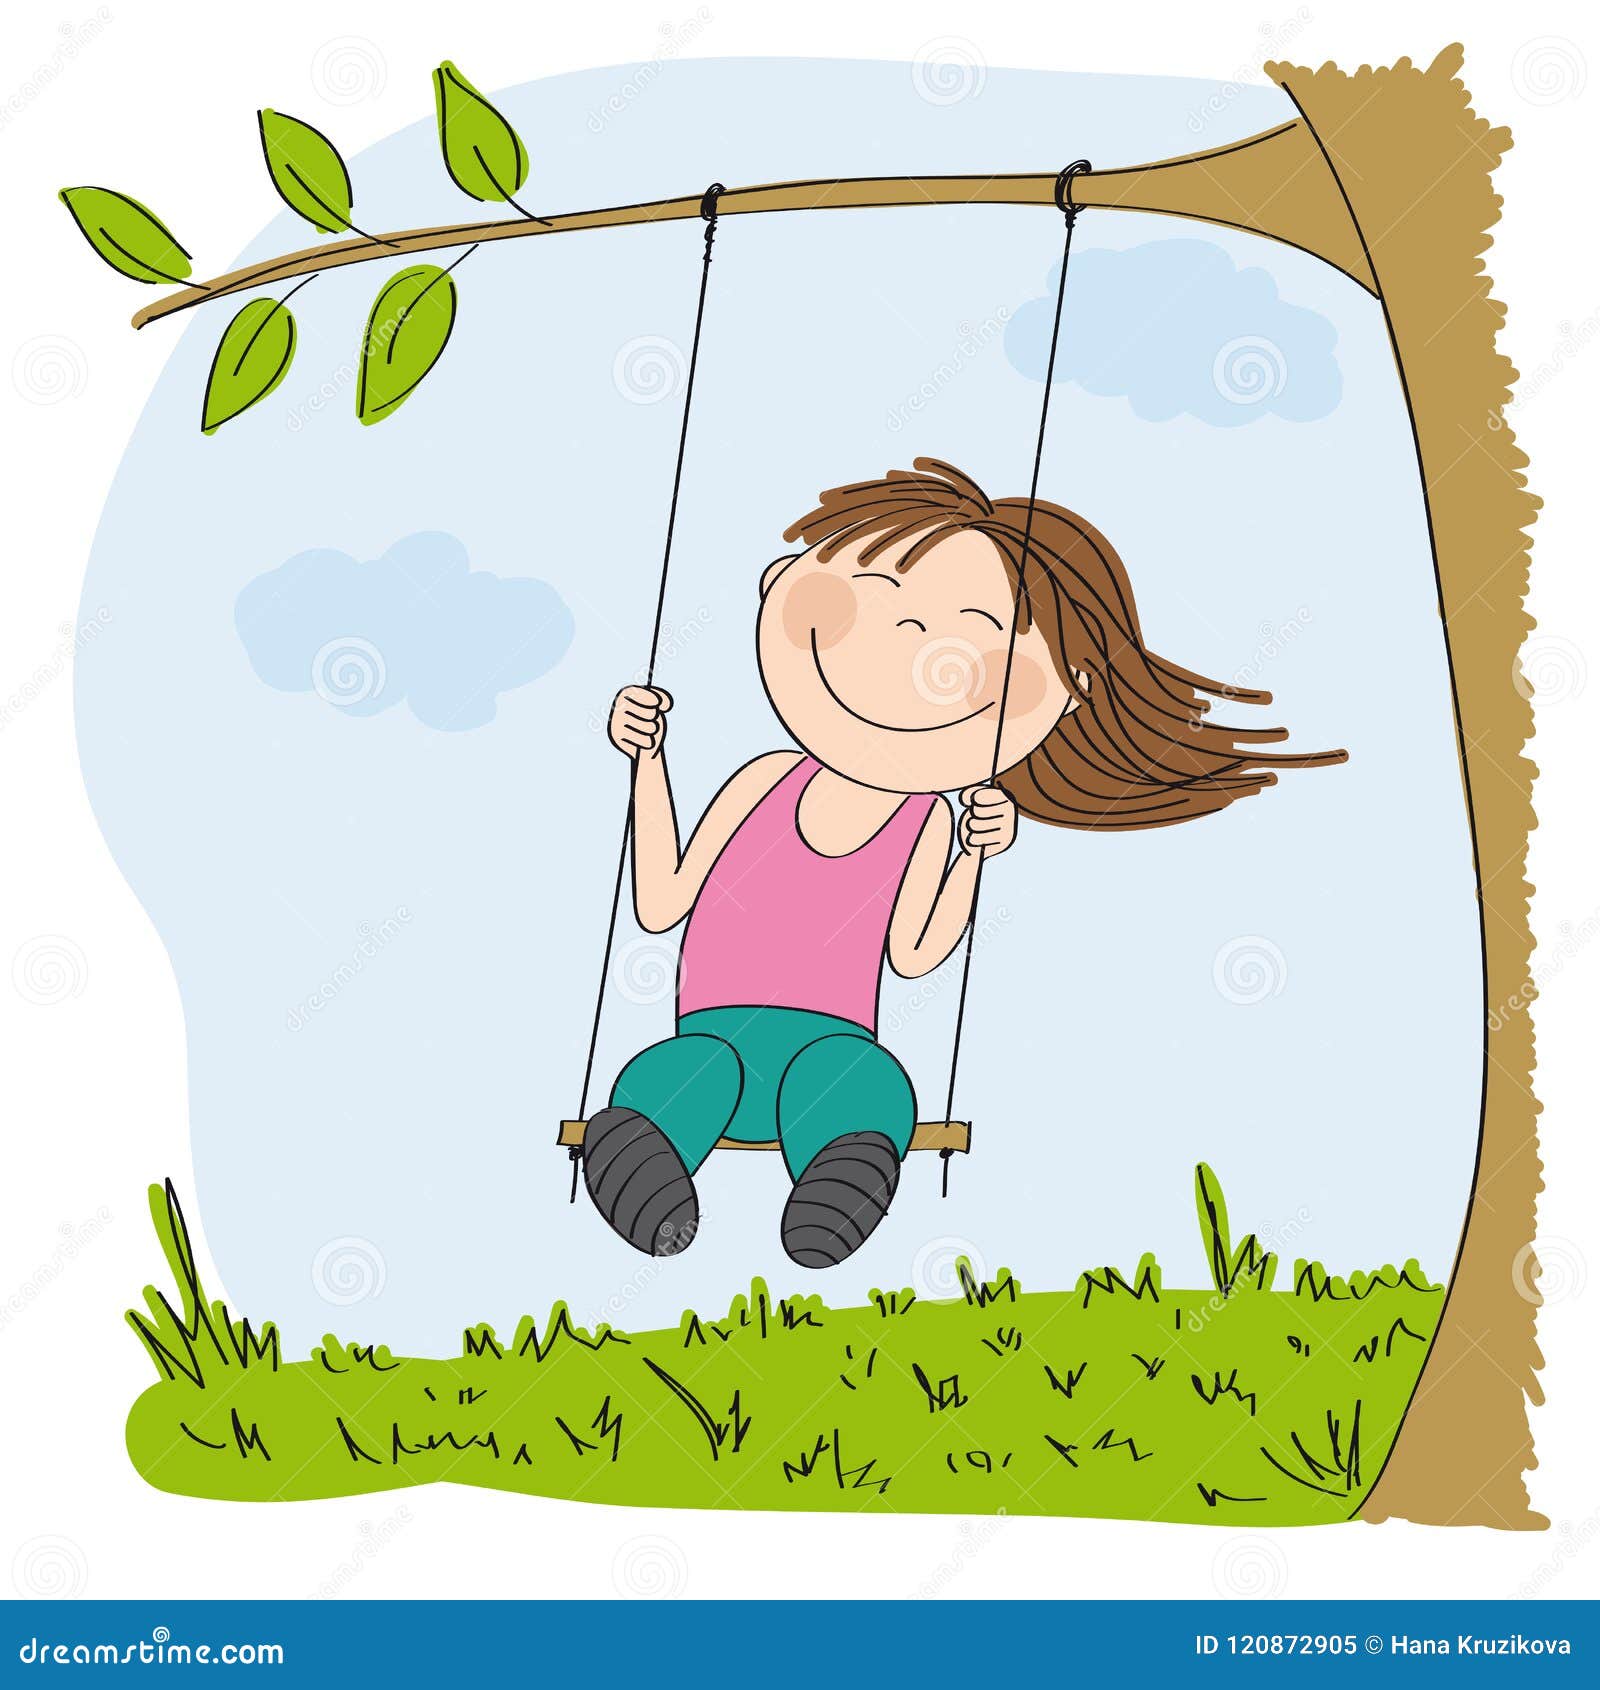 Single one line drawing happy boys and girls playing tire swing under tree.  Kids swinging on tire hanging from tree. Children playing in garden.  Continuous line draw design graphic vector illustration 23469957